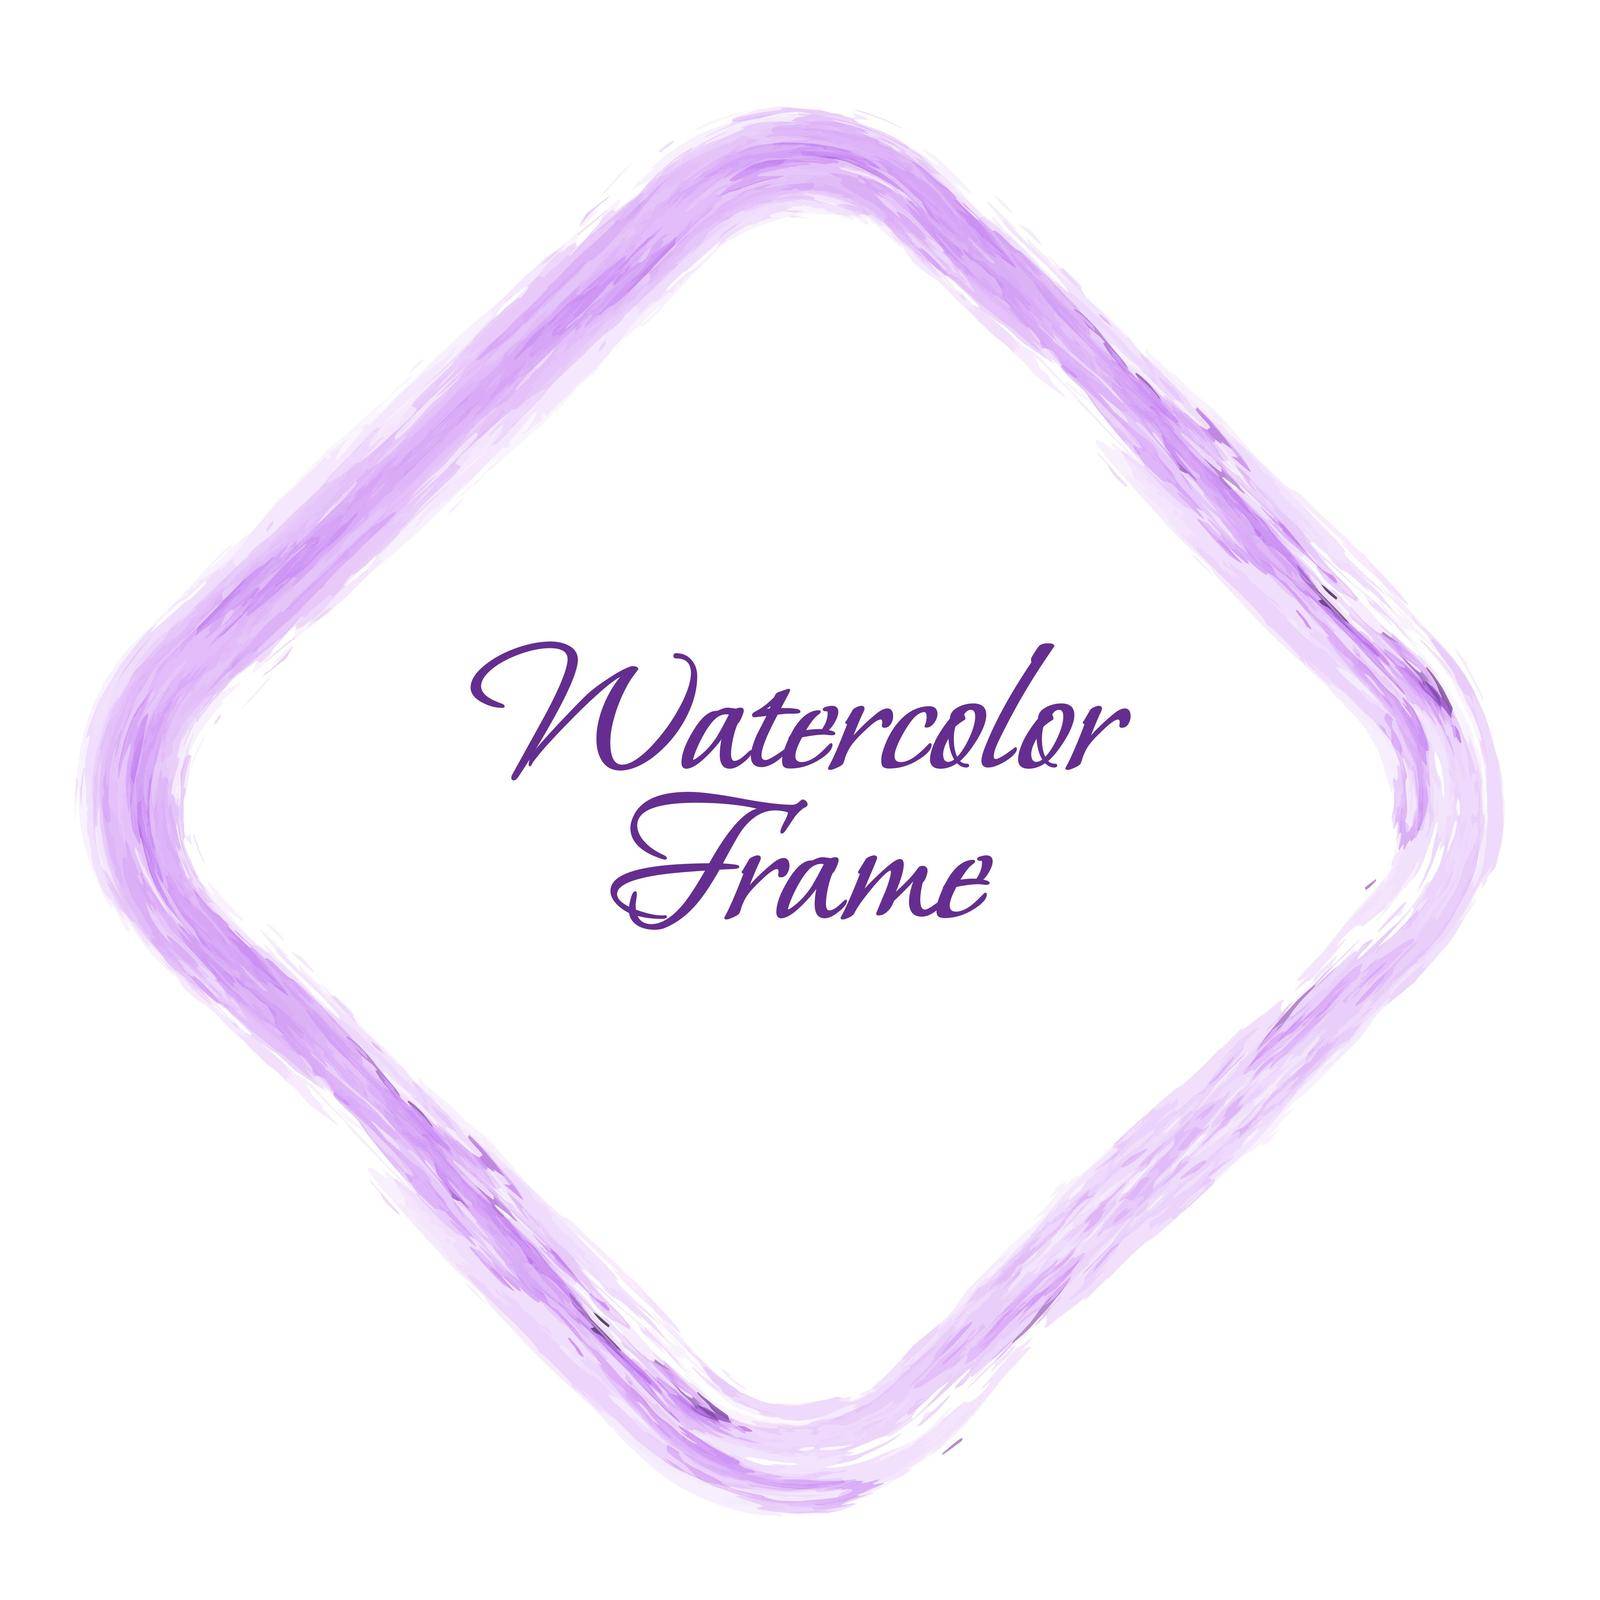 Square purple watercolor frame for postcards, banners, posters and creative design. Vector illustration.